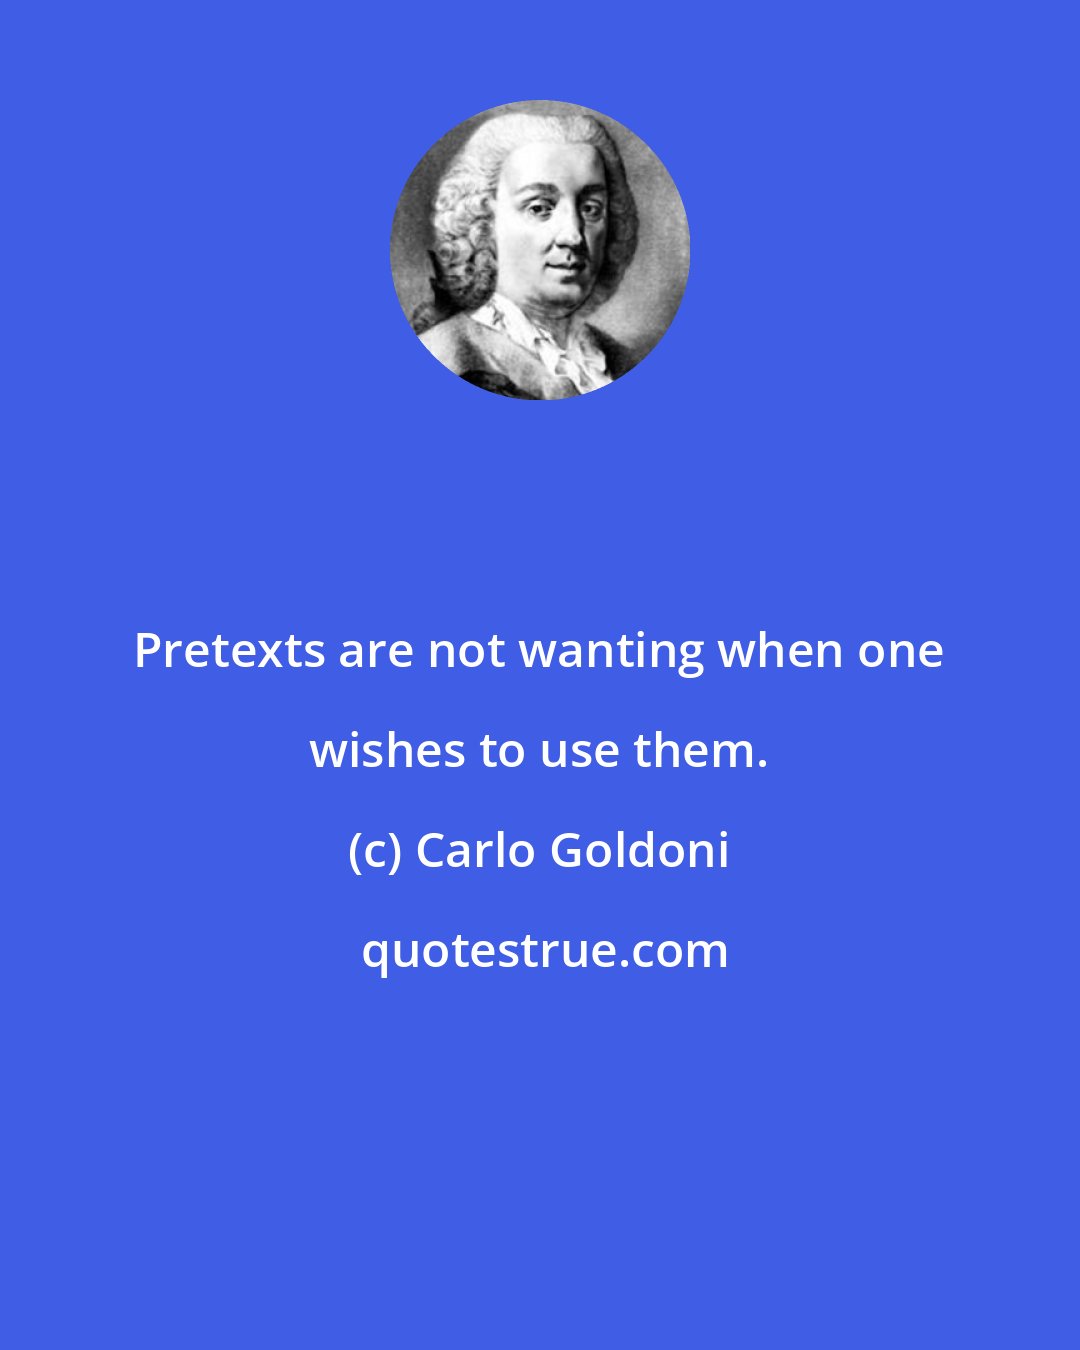 Carlo Goldoni: Pretexts are not wanting when one wishes to use them.